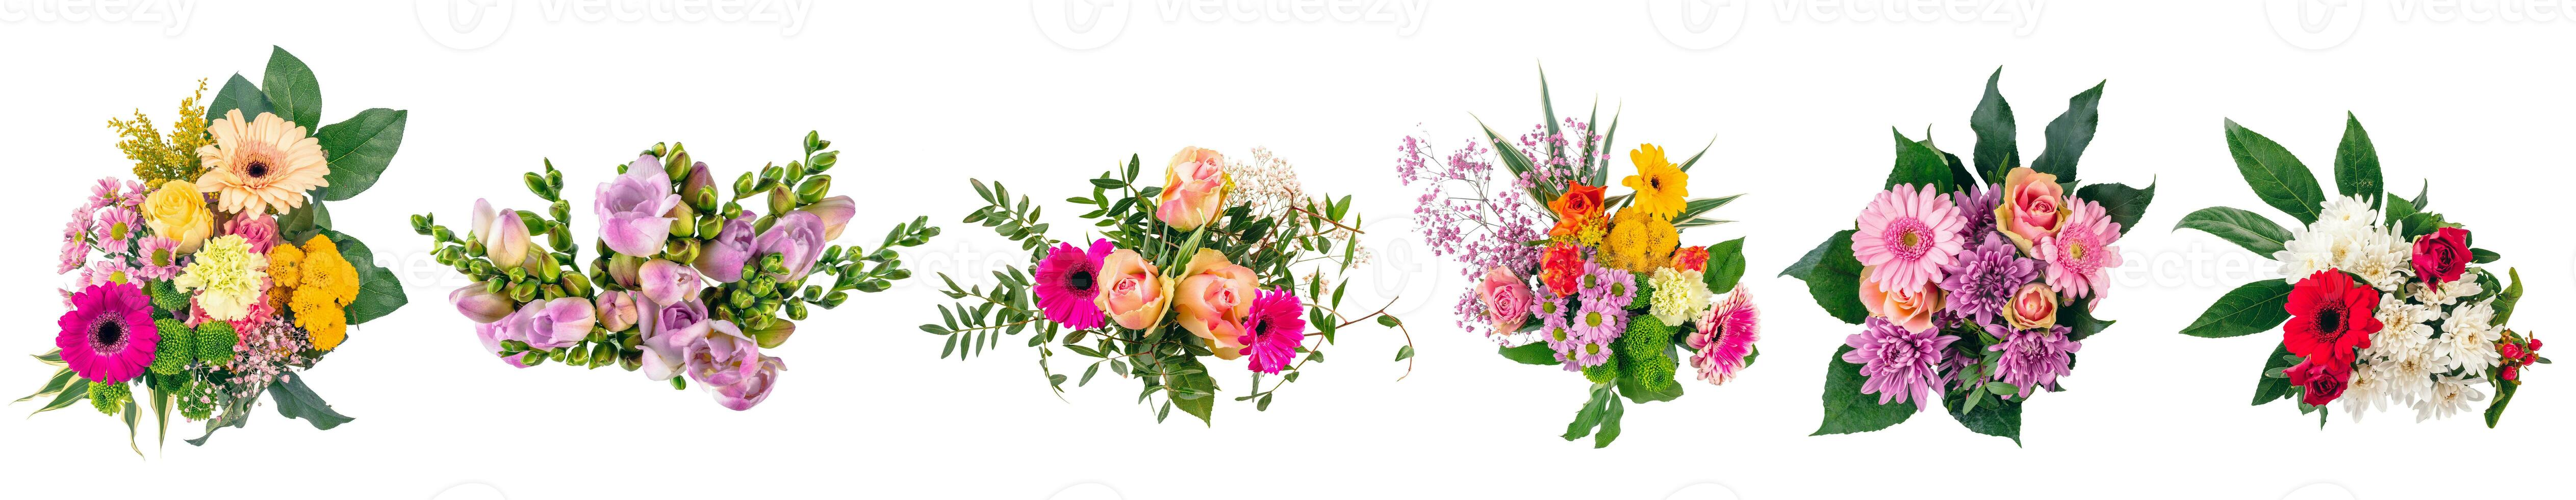 Flowers bouquets and wreaths collection, set isolated on transparent white background photo